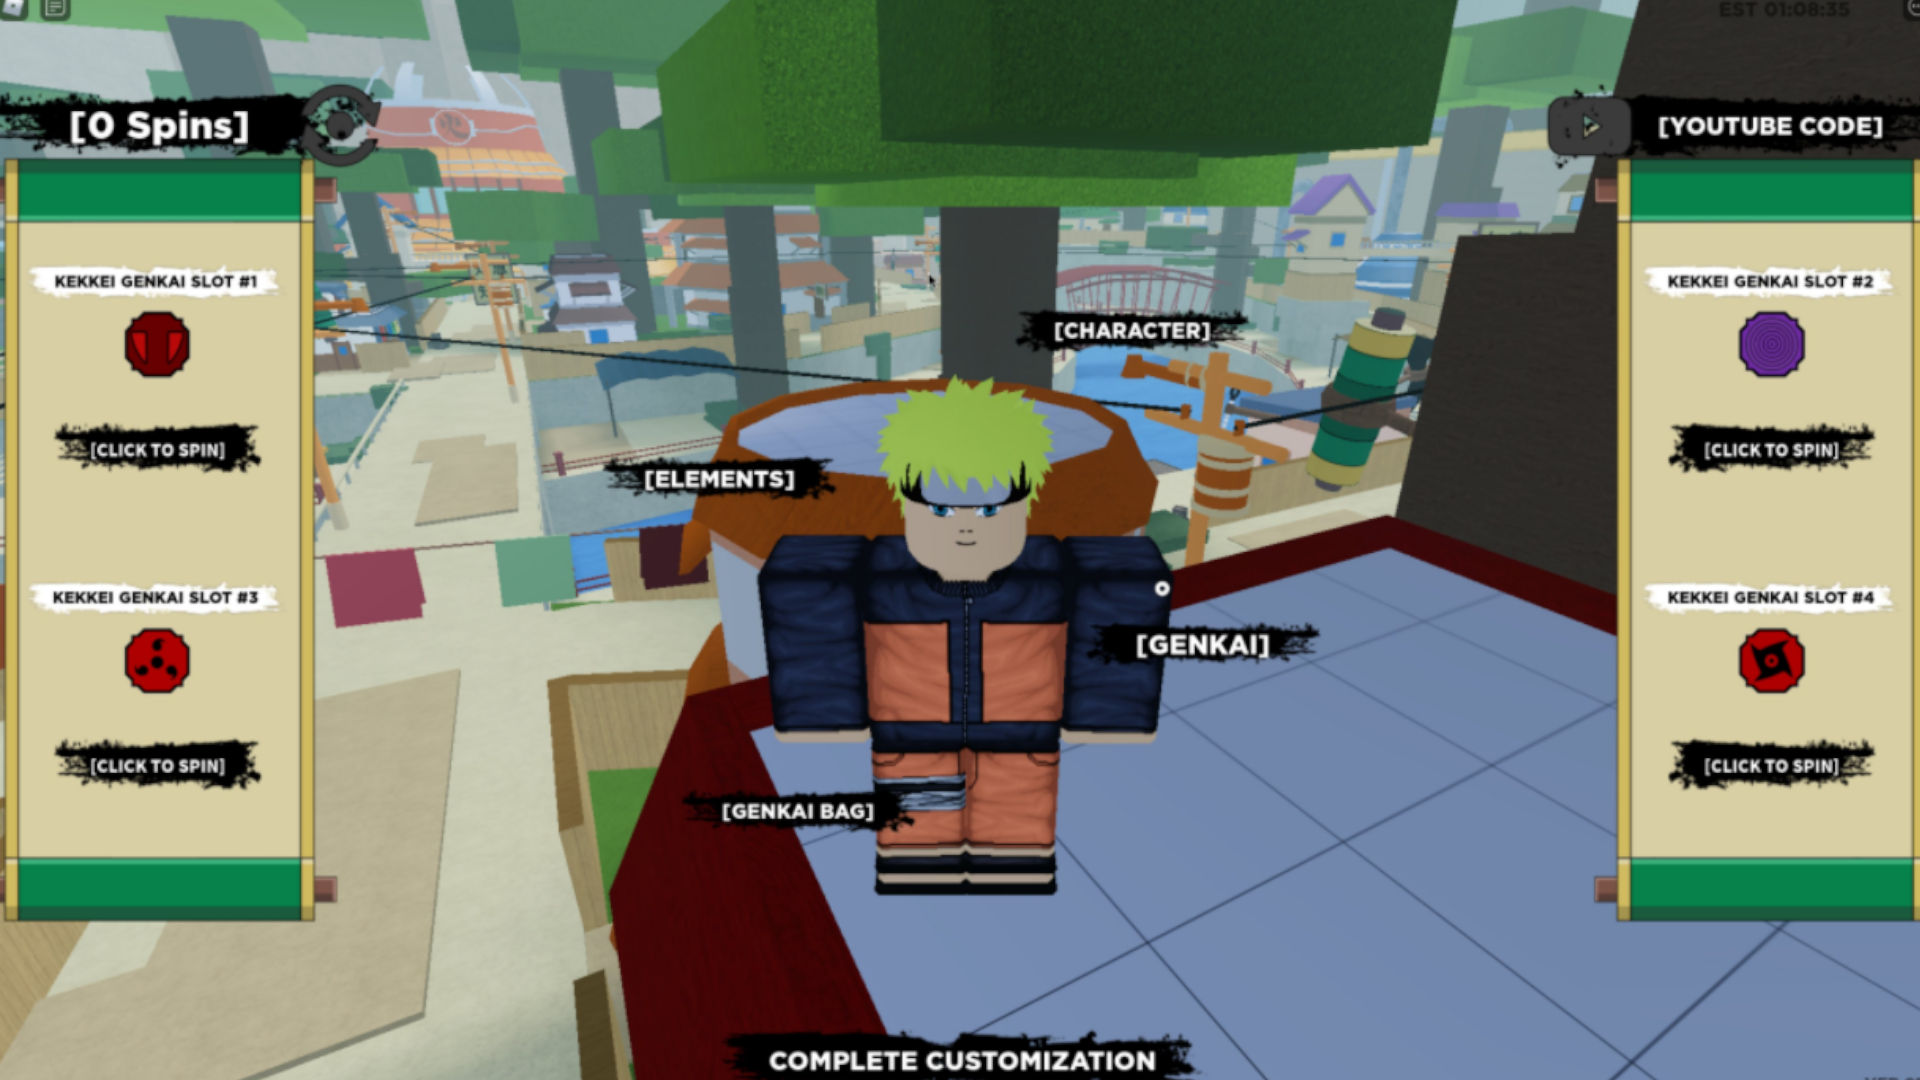 Roblox anime games might be a ticking timebomb | Pocket Tactics